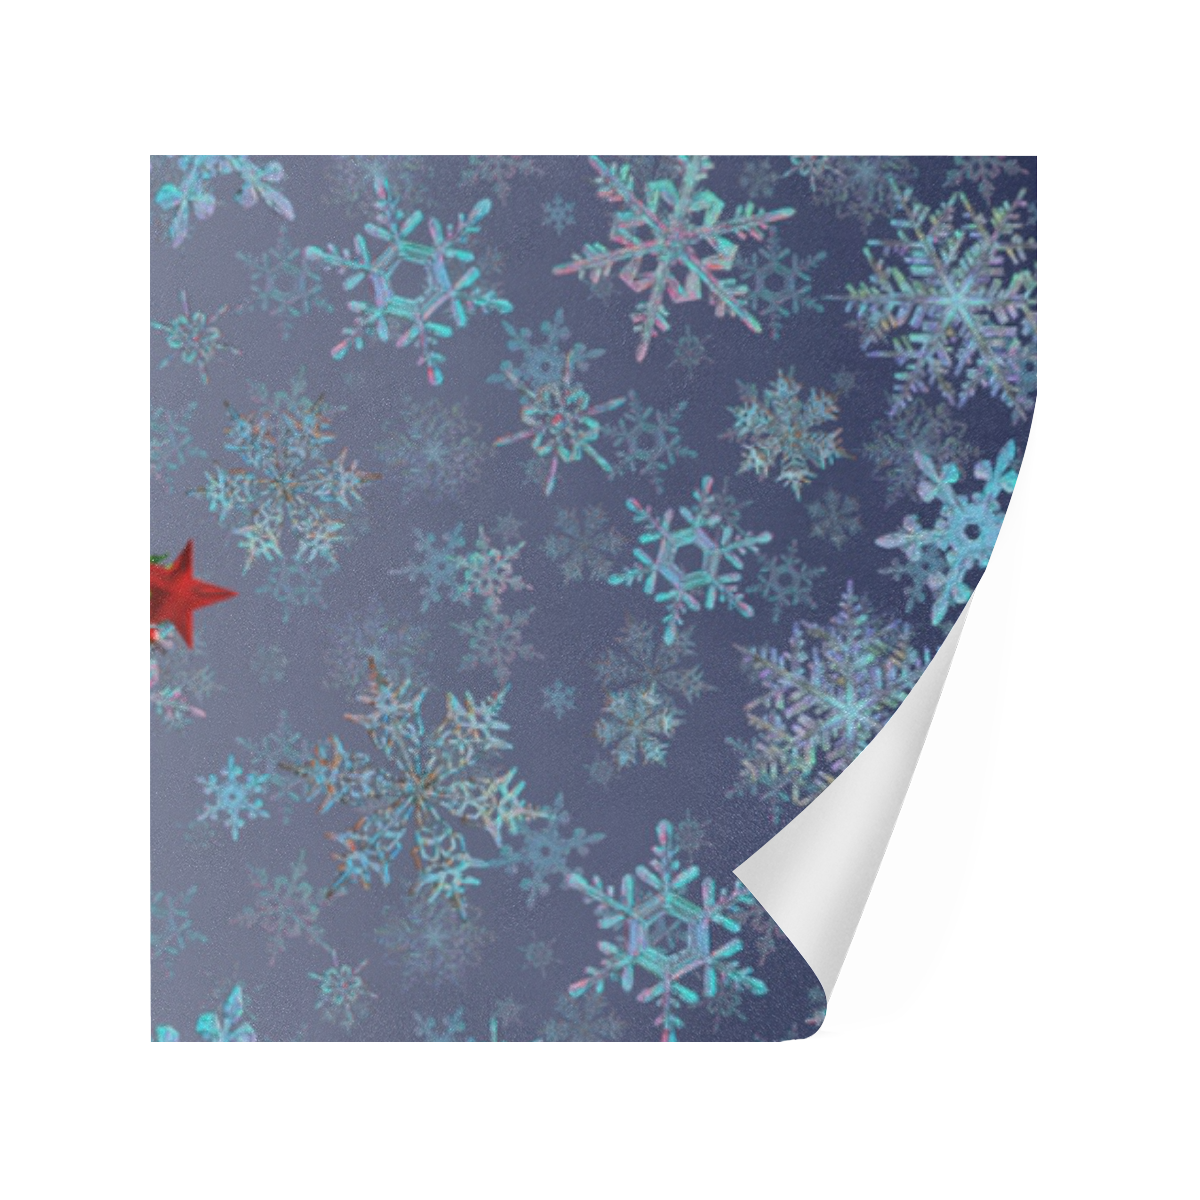 Christmas Tree at night, snowflakes Gift Wrapping Paper 58"x 23" (5 Rolls)